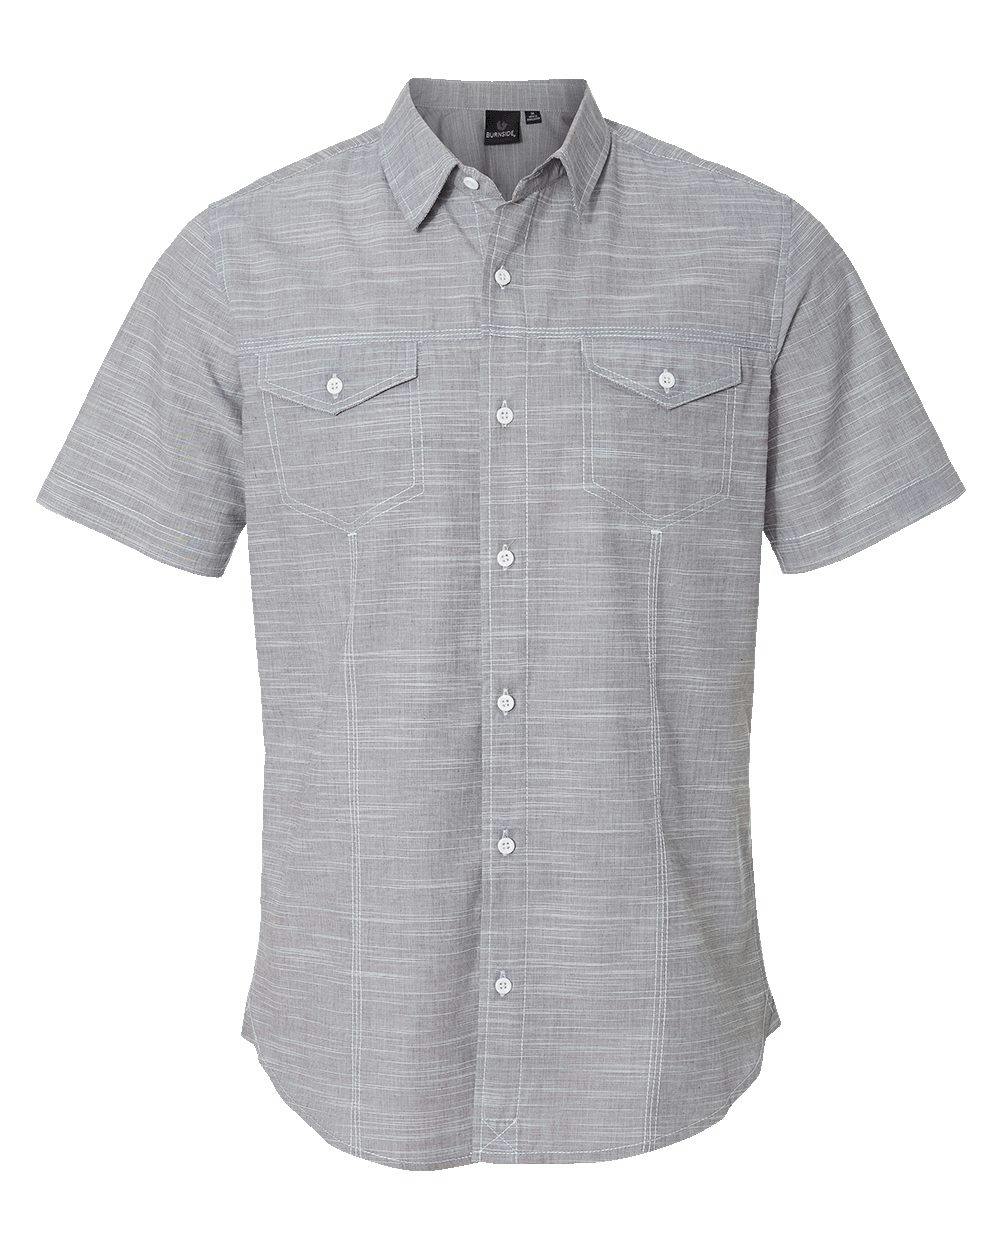 Image for Textured Solid Short Sleeve Shirt - 9247